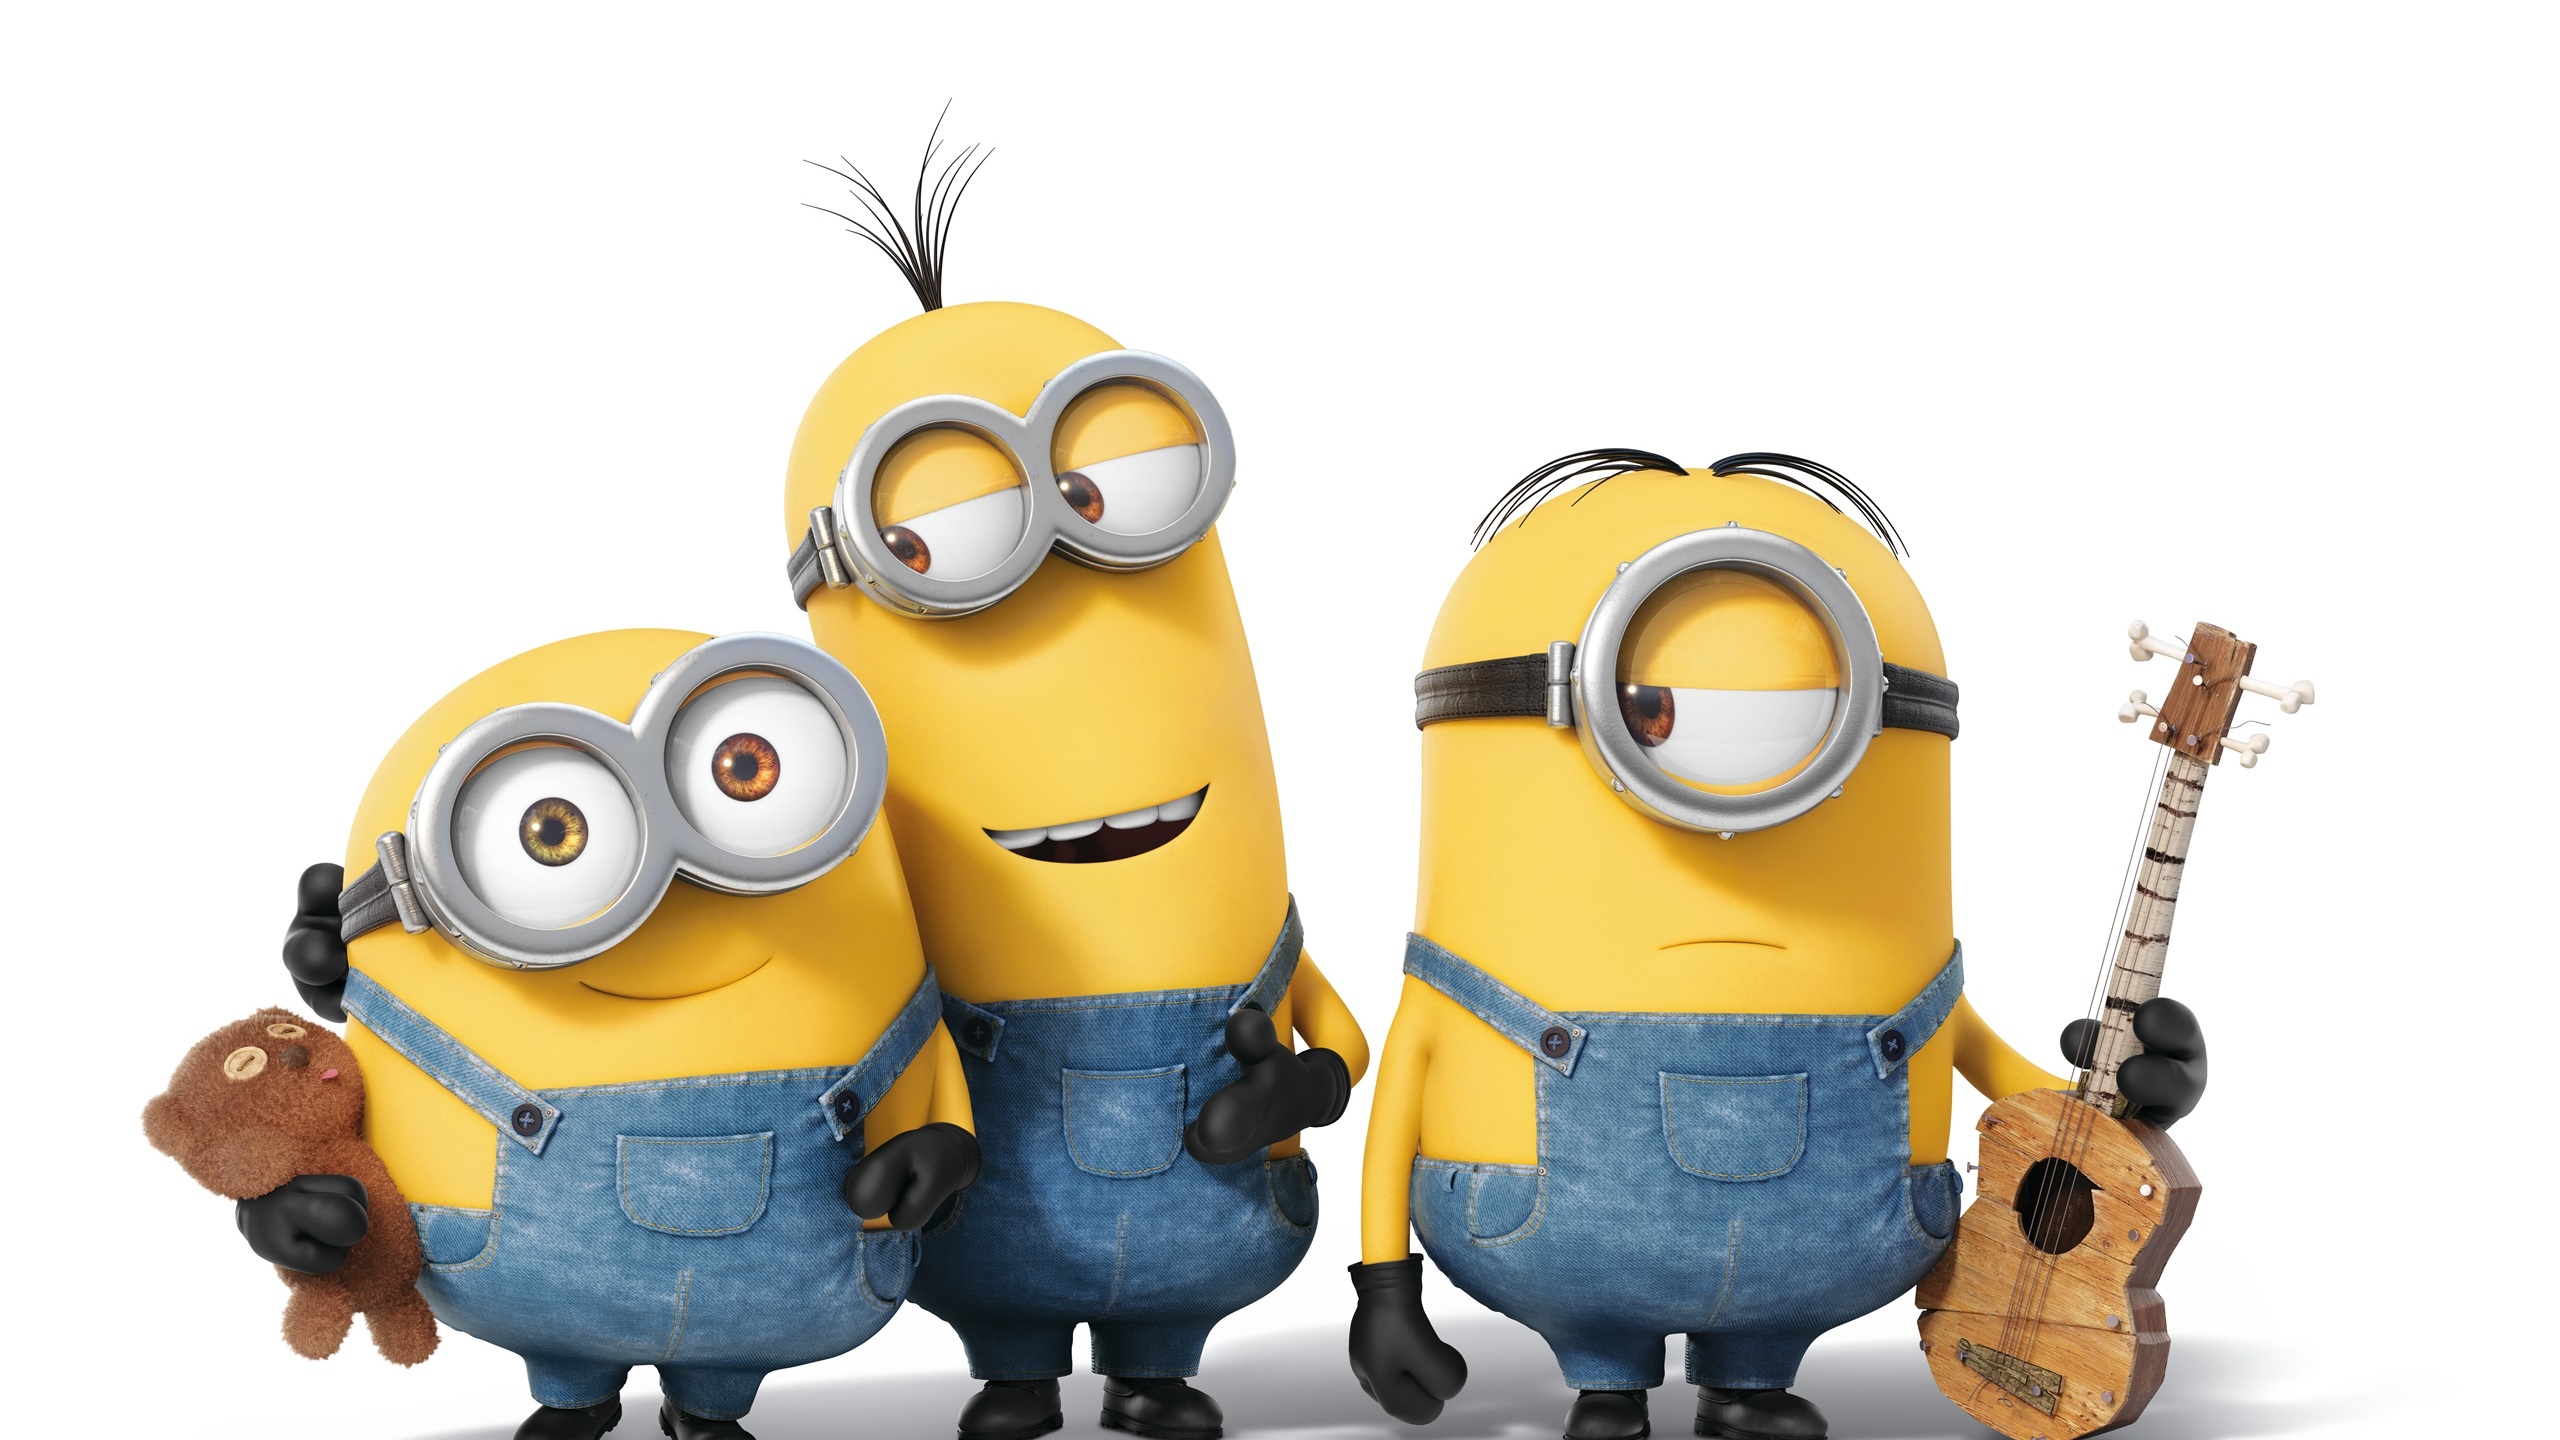 General 2560x1440 minions animation white background movies movie characters Universal Pictures